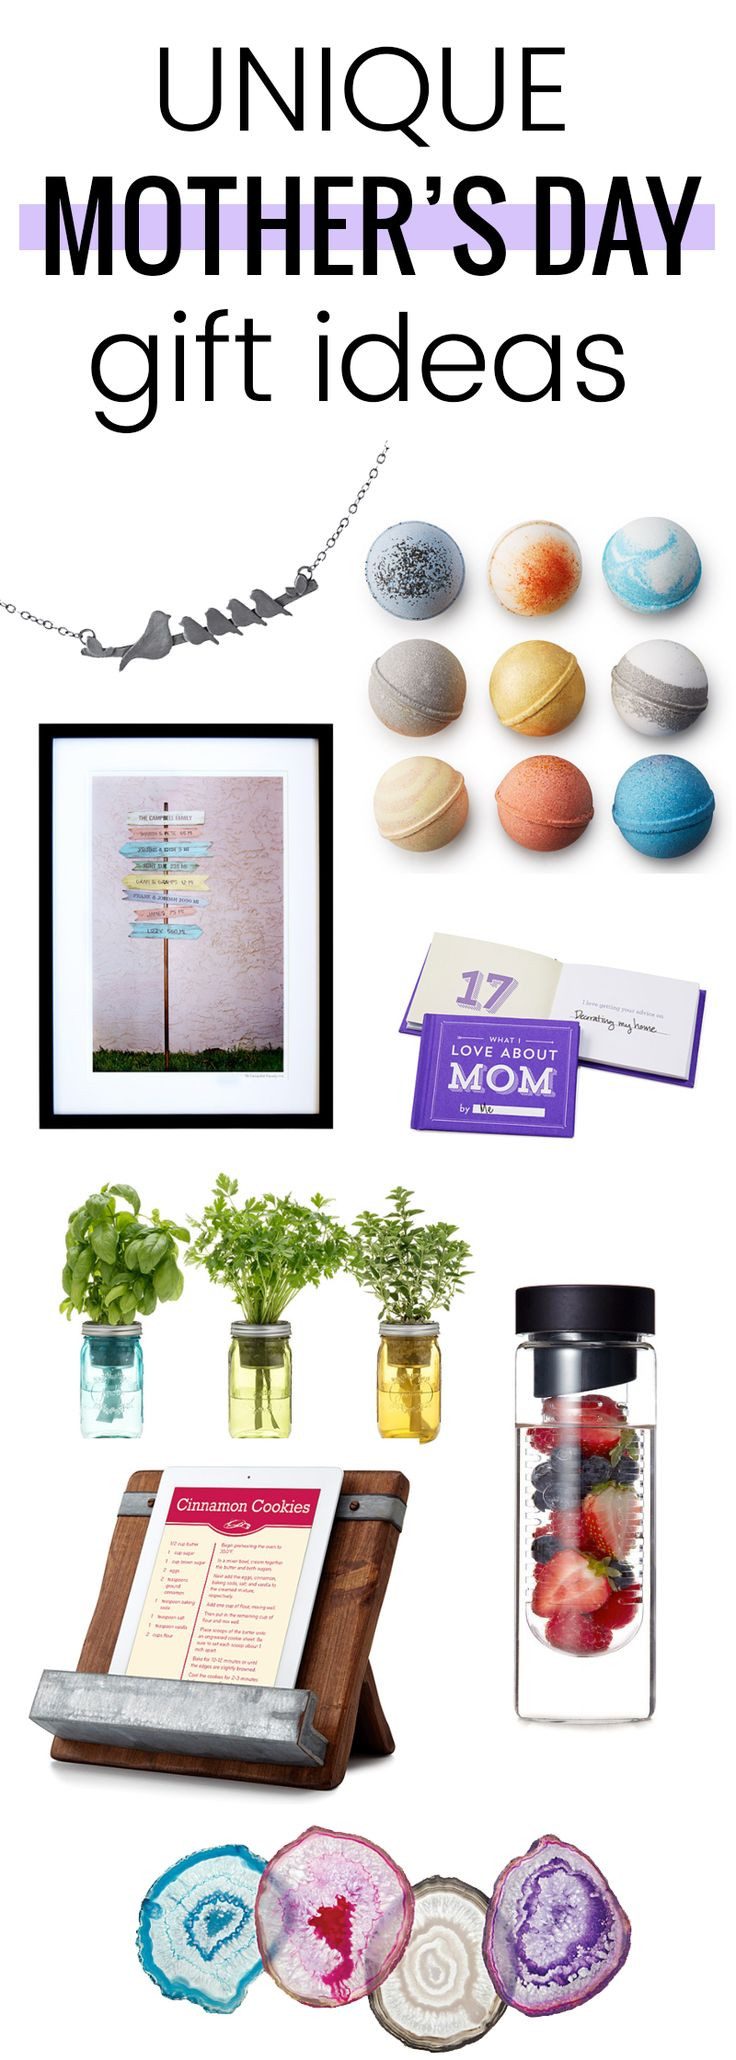 Creative Mother Day Gift Ideas
 25 trending Unique Mothers Day Gifts ideas on Pinterest